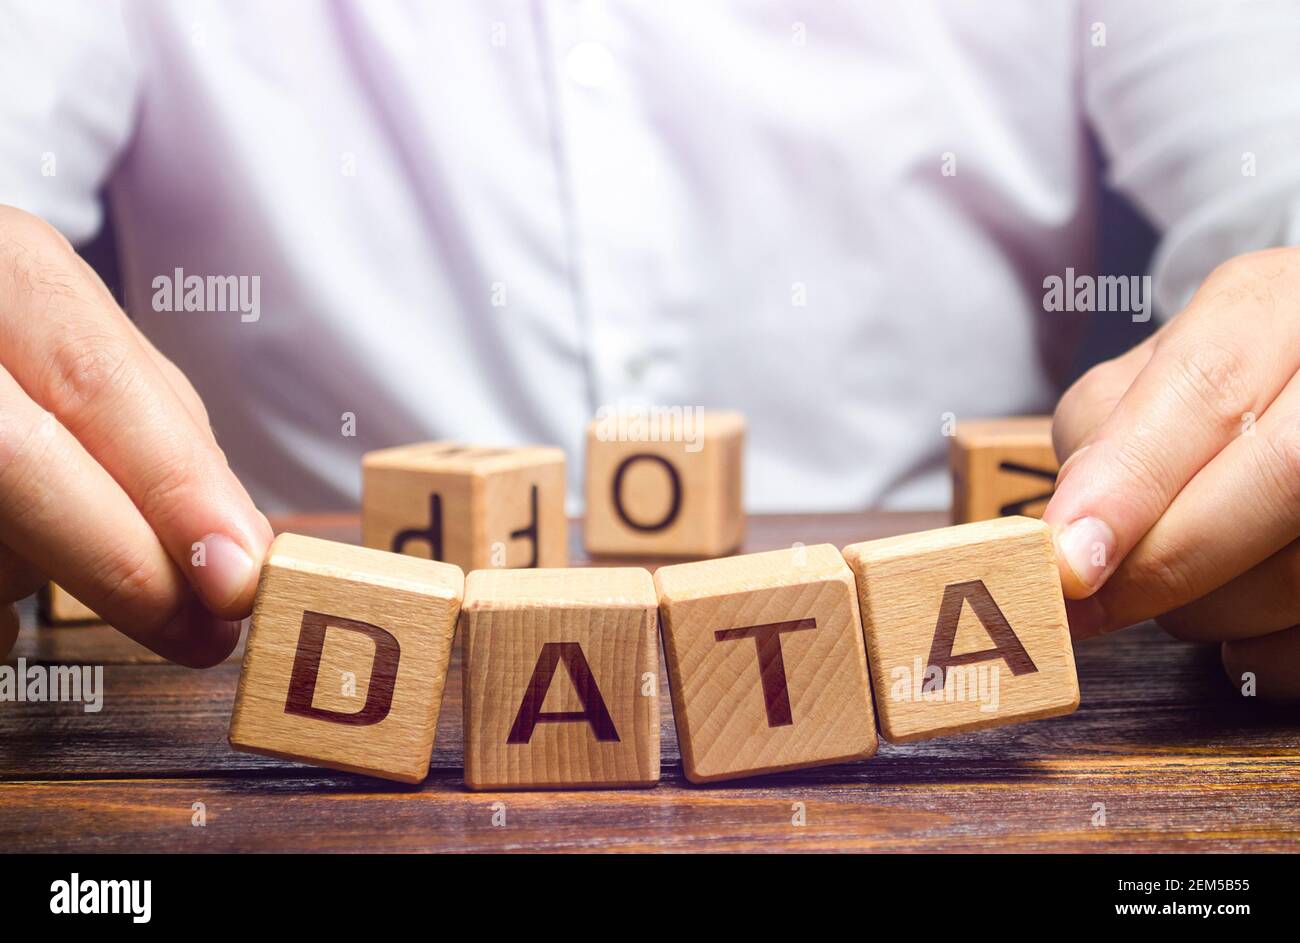 The man tries to pick up blocks with the word Data. Digital data integrity and security vulnerability concept. Fault tolerance, backup. Financial data Stock Photo